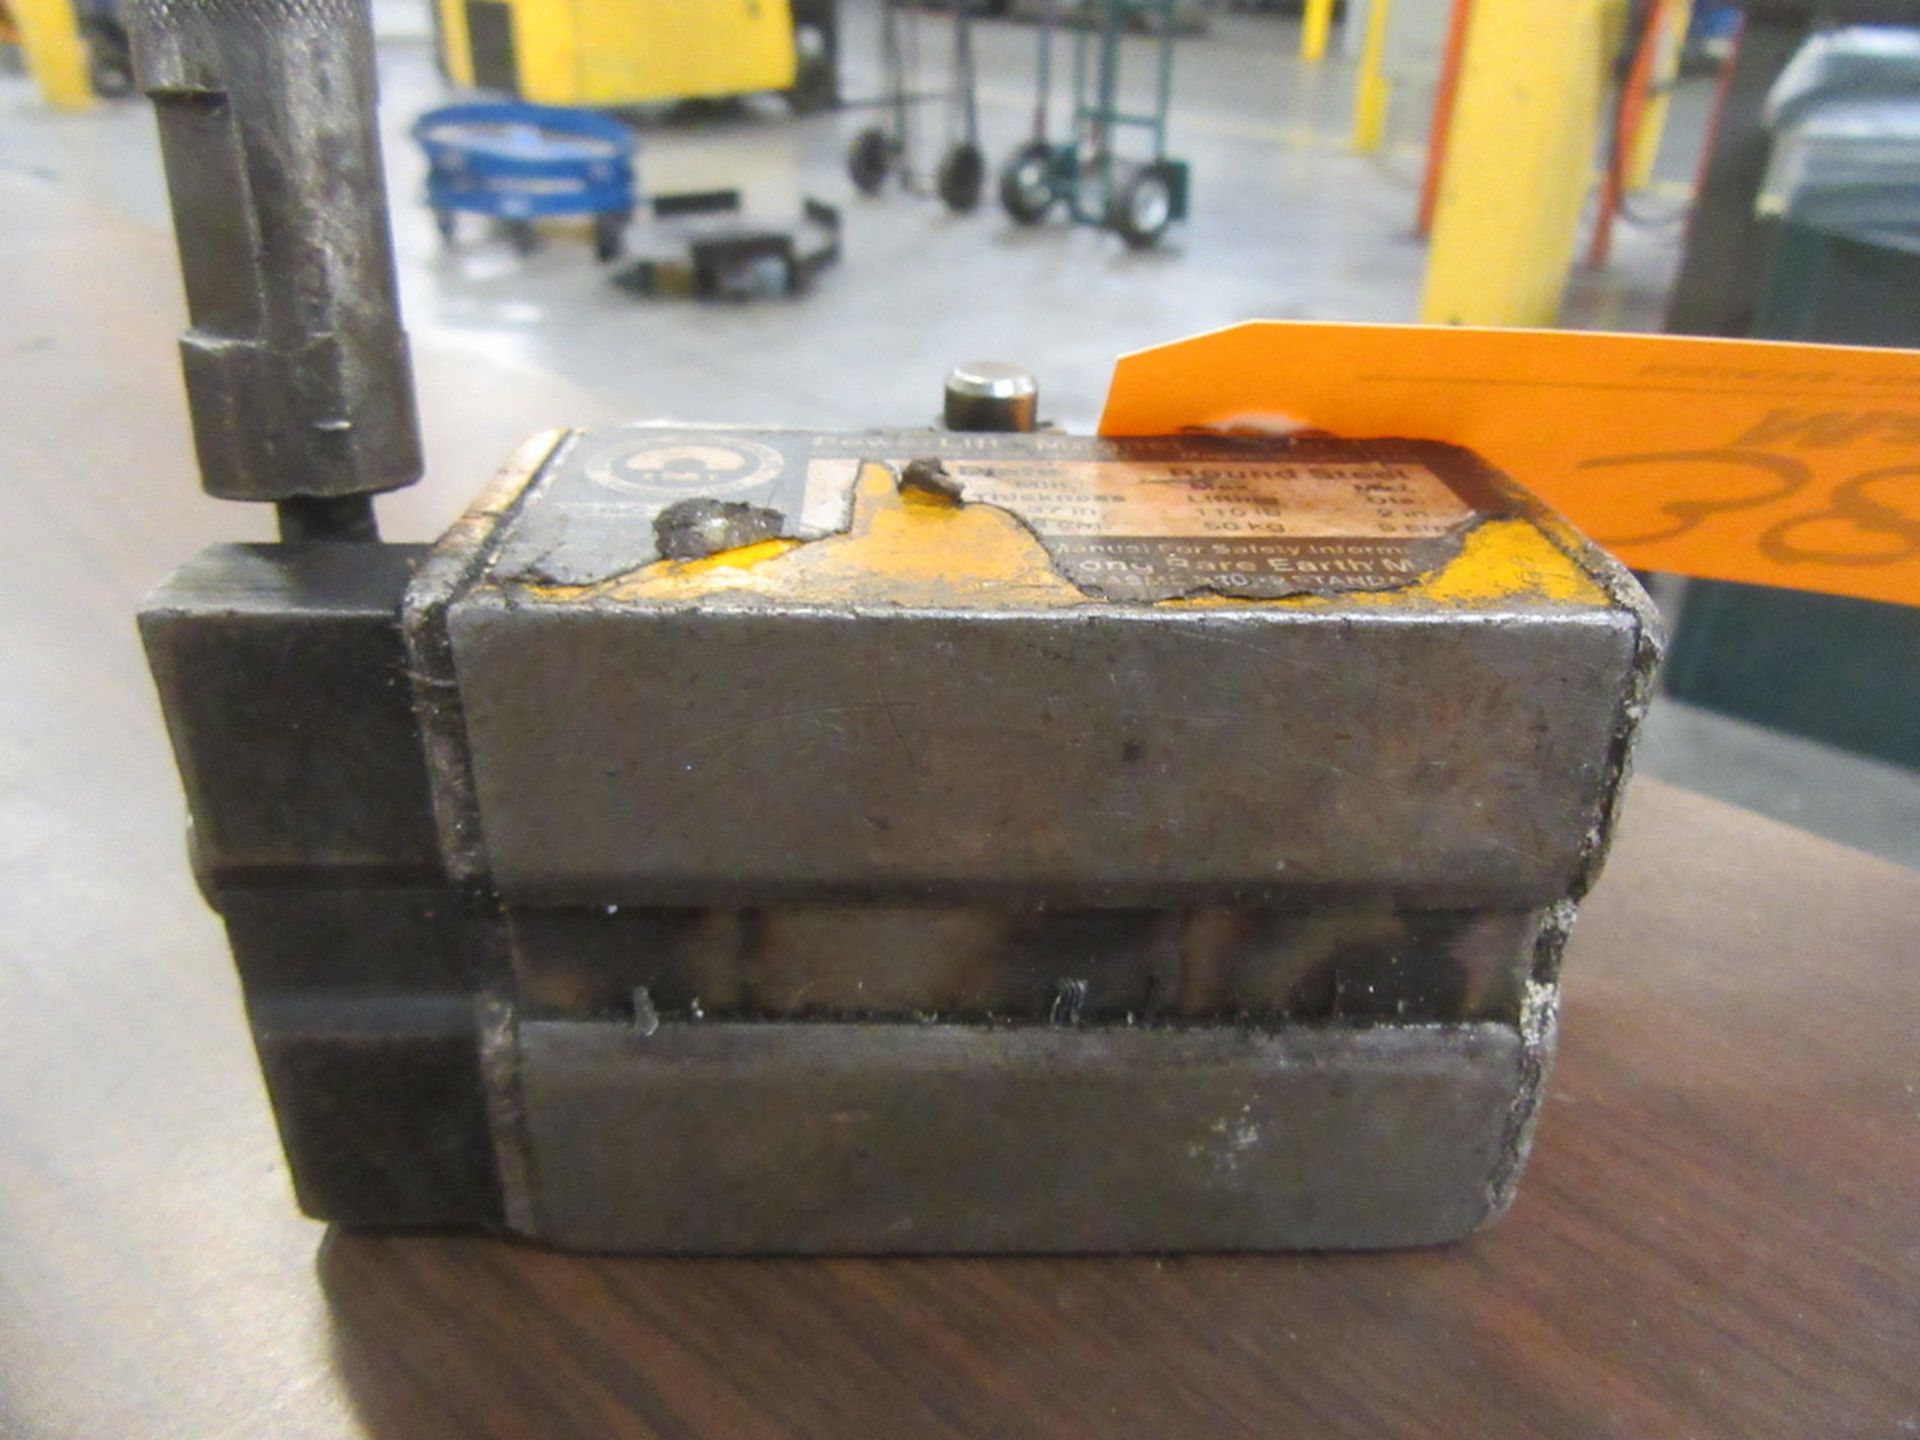 Mag-Mate PNL220 Powerlift Magnet - Image 3 of 3